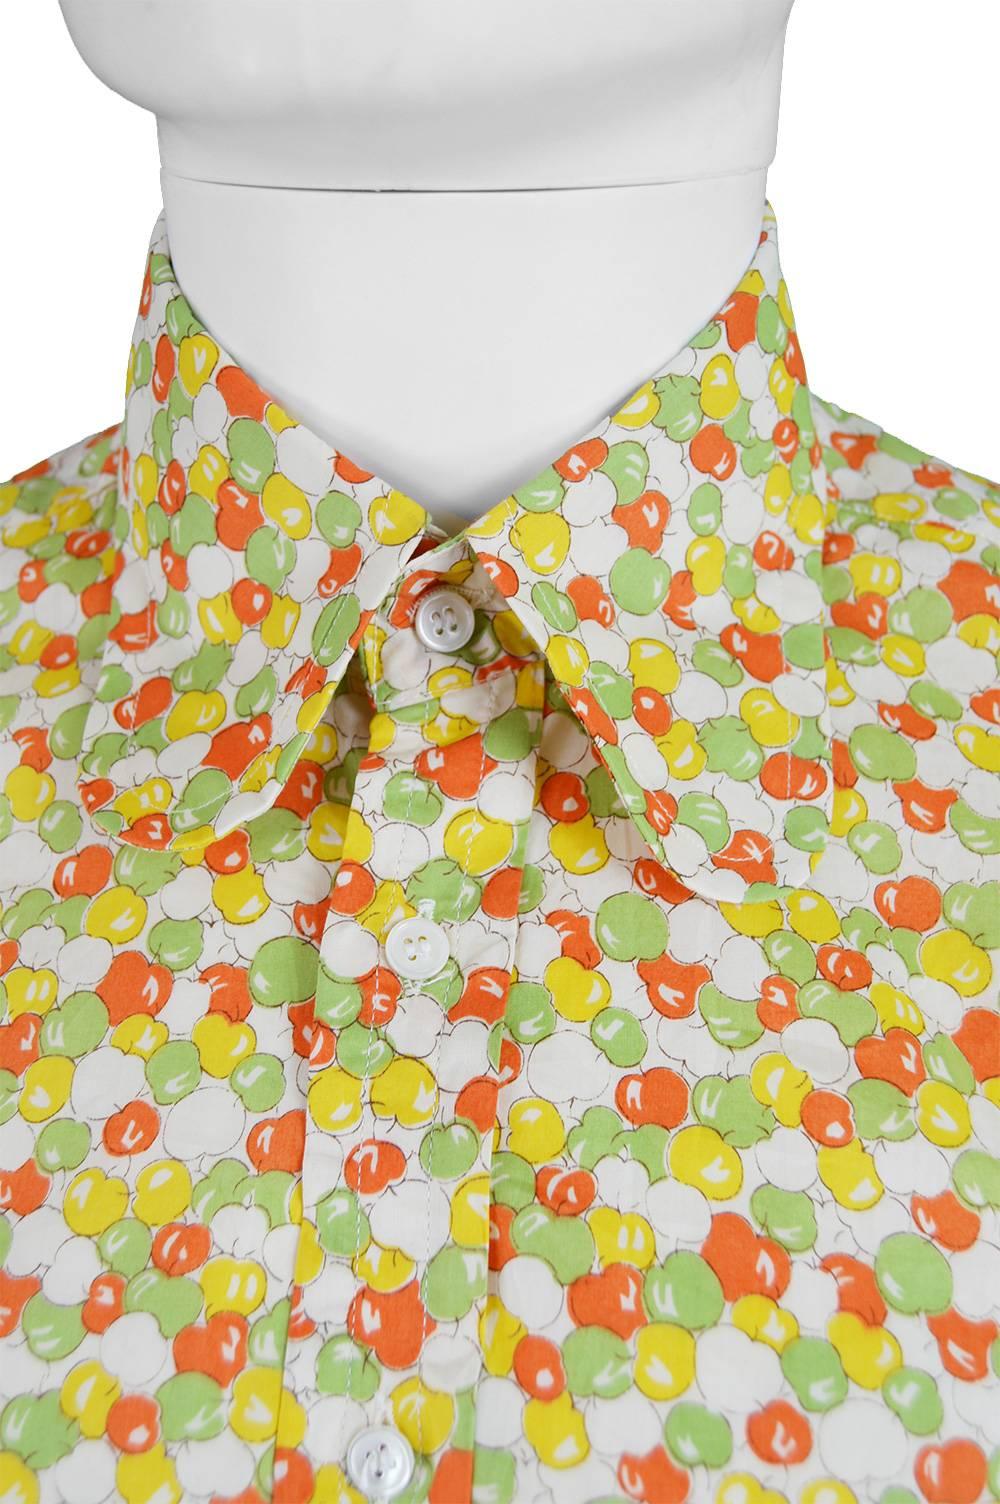 Vintage Take Six of Carnaby Street Apple Print Cotton Long Sleeve Shirt, 1960s

Size: Marked 16 & 1/2